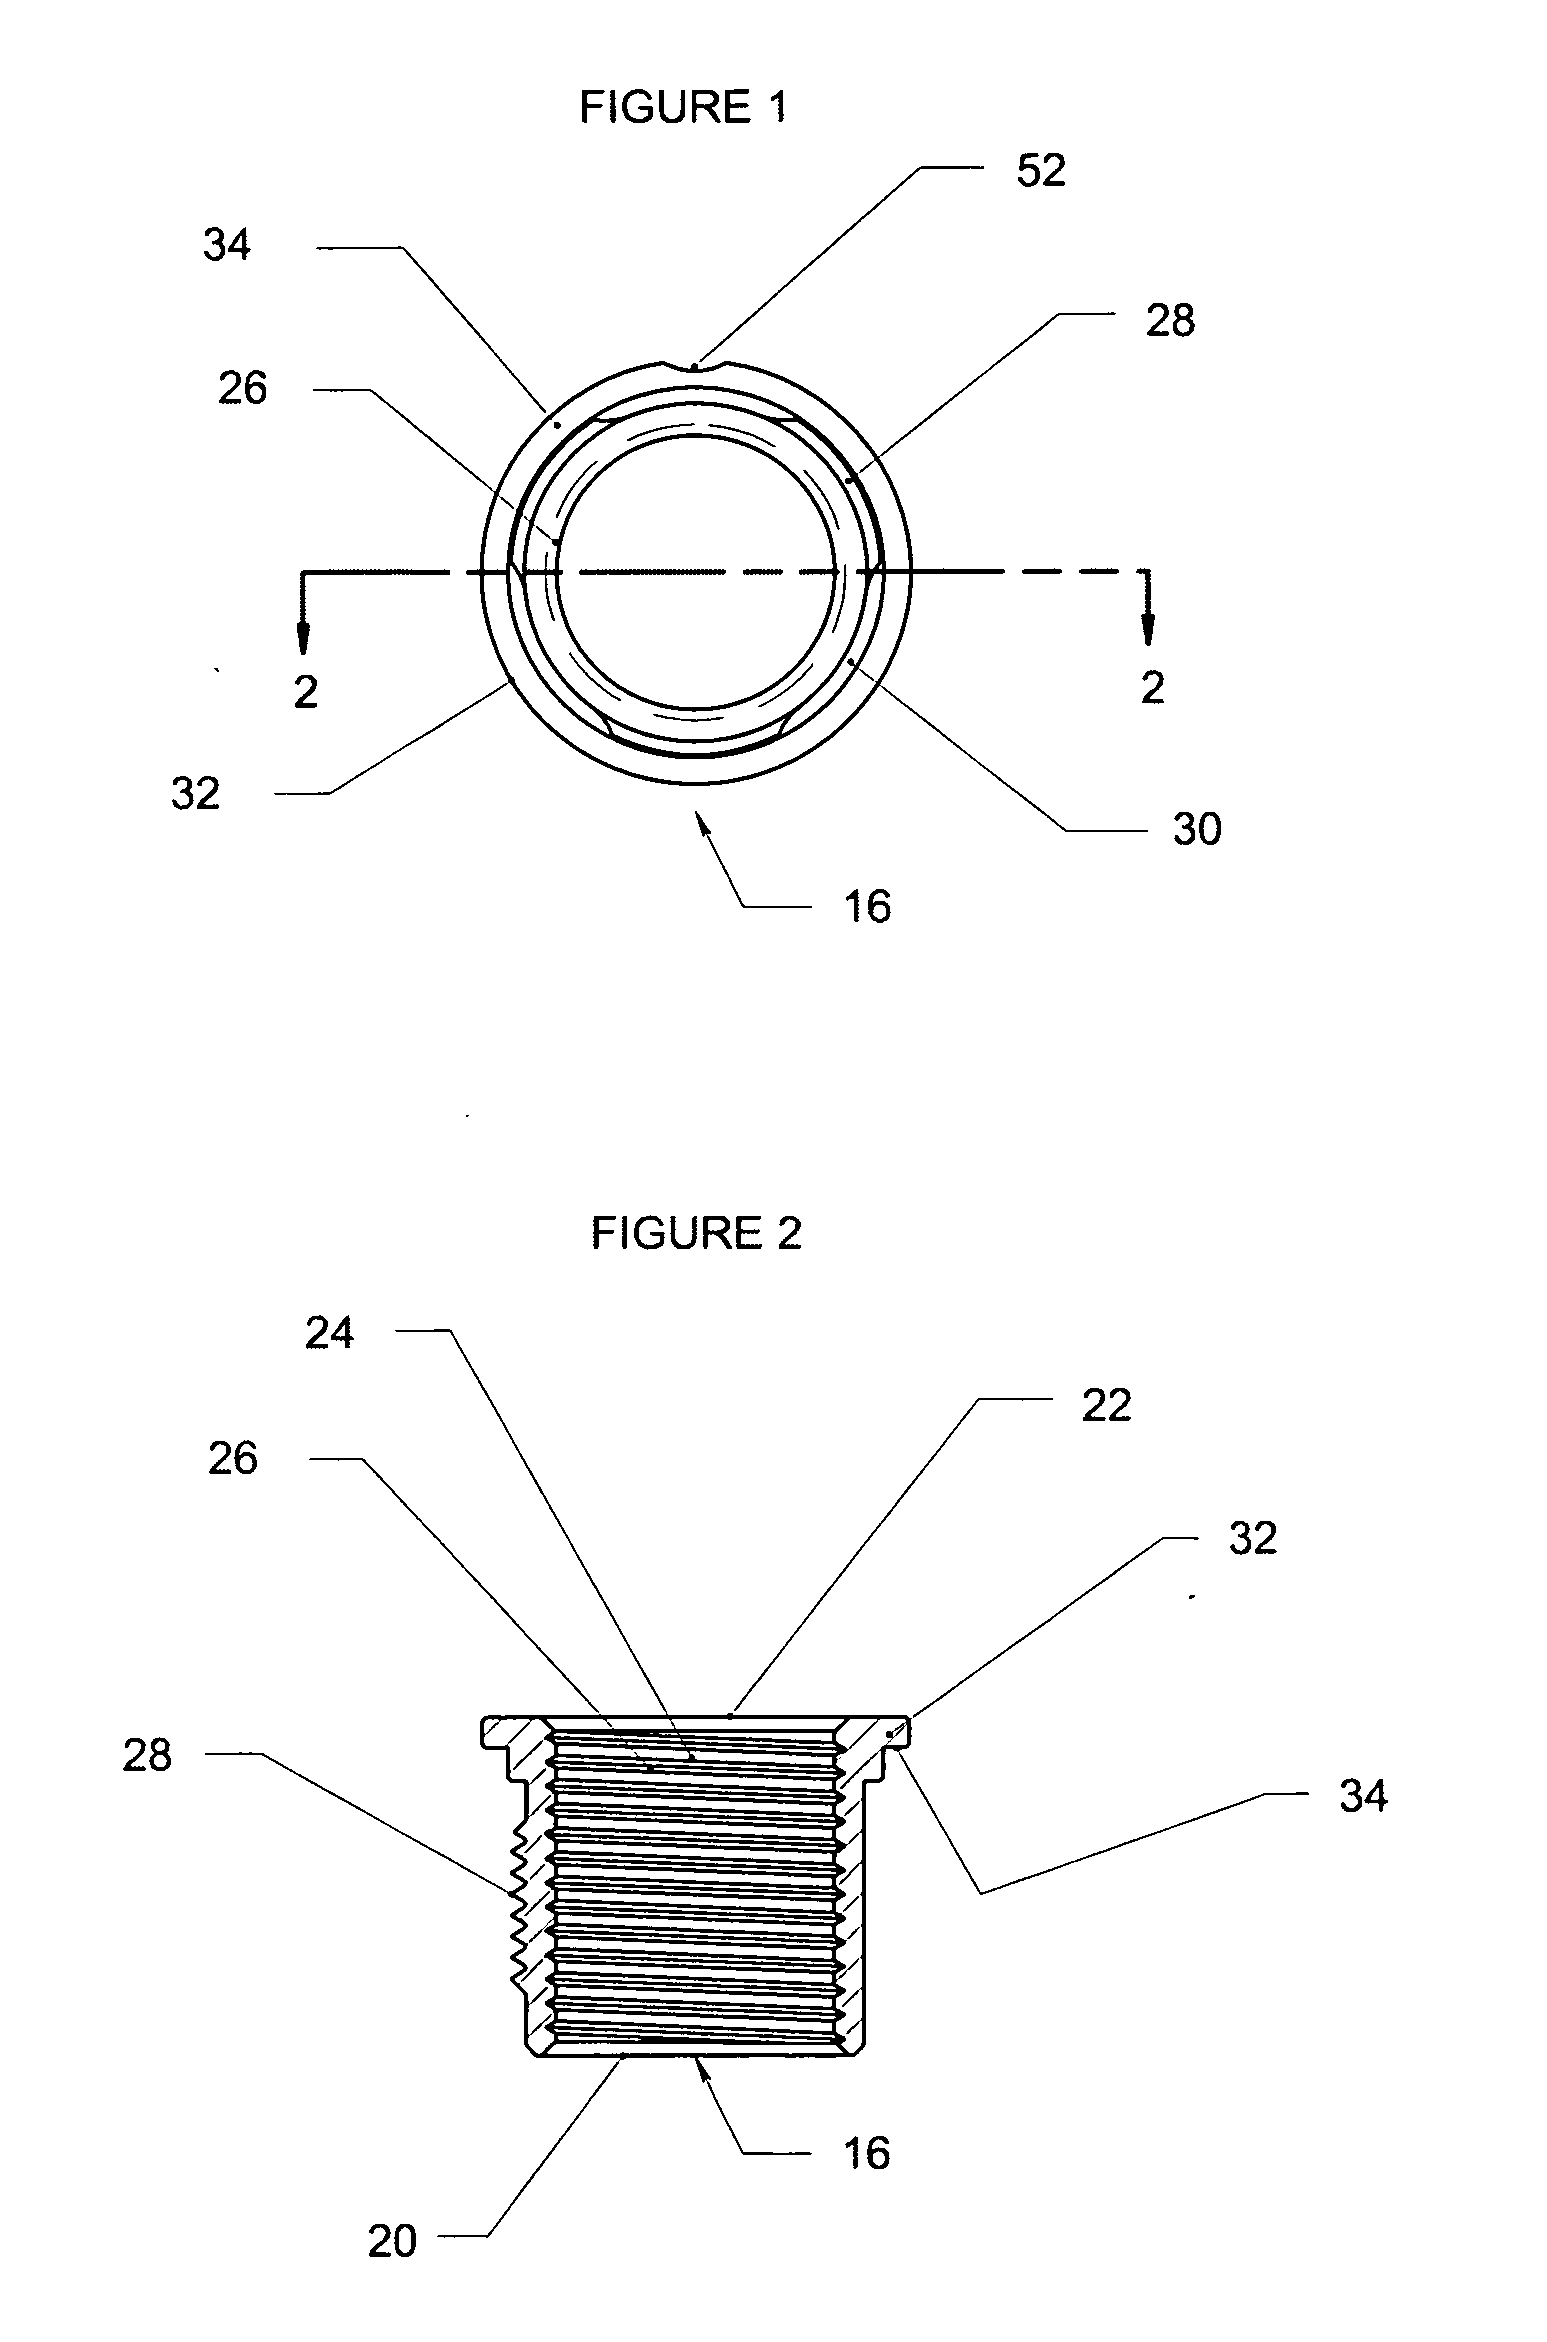 System and method for mounting dies on a press